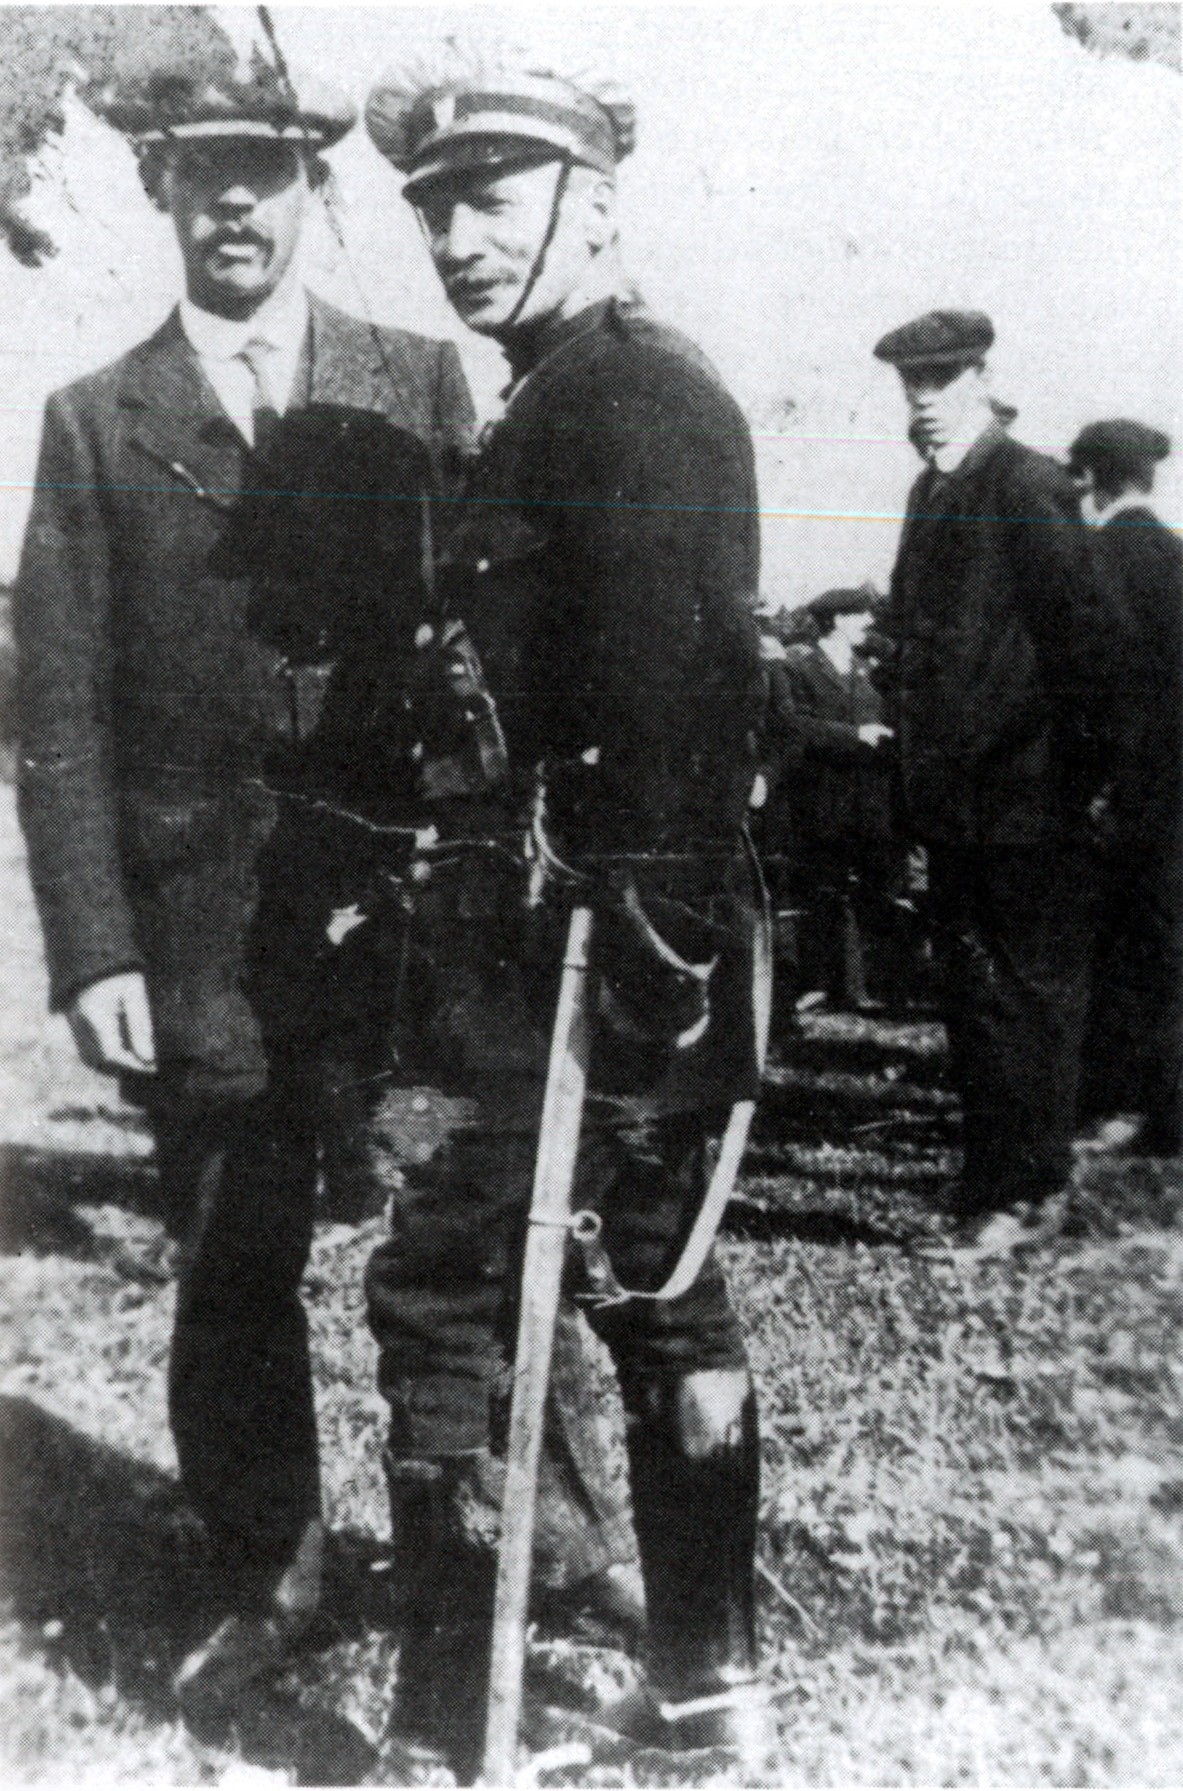 A photograph of two Irish Volunteers taken at Celtic Park, Derry, in 1914.